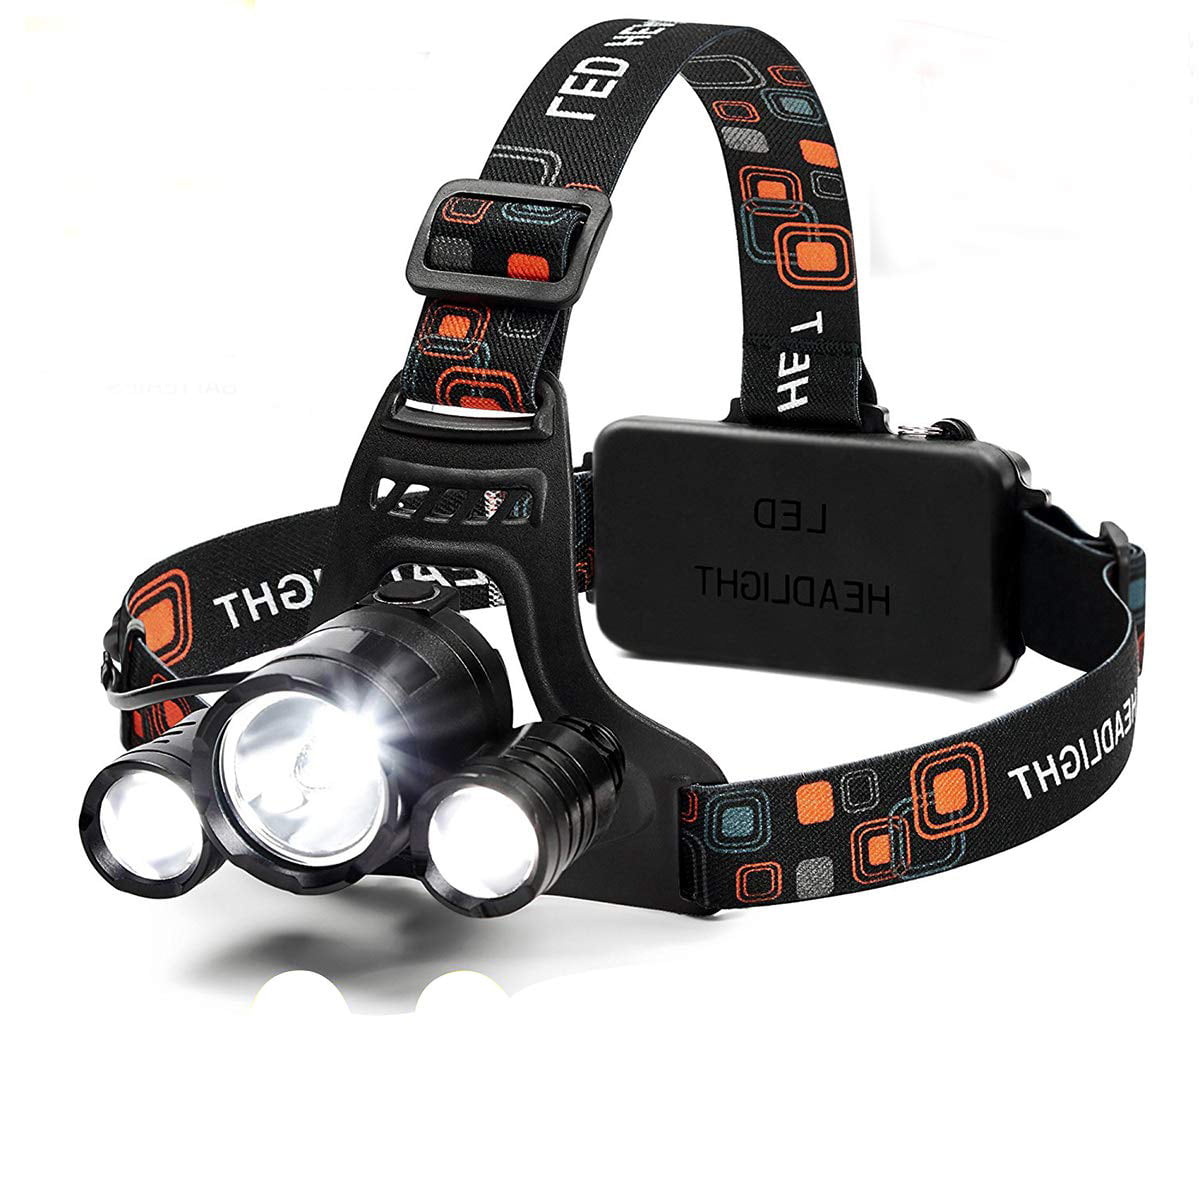 MC1 for 18350 CR123 Nitefox Magnetic Flashlight Headlamp Magnetic USB Rechargeable 2000 Lumens High Bright Outdoor Headlamp for Outdoor Hiking,Hunting,Fishing,Camping 